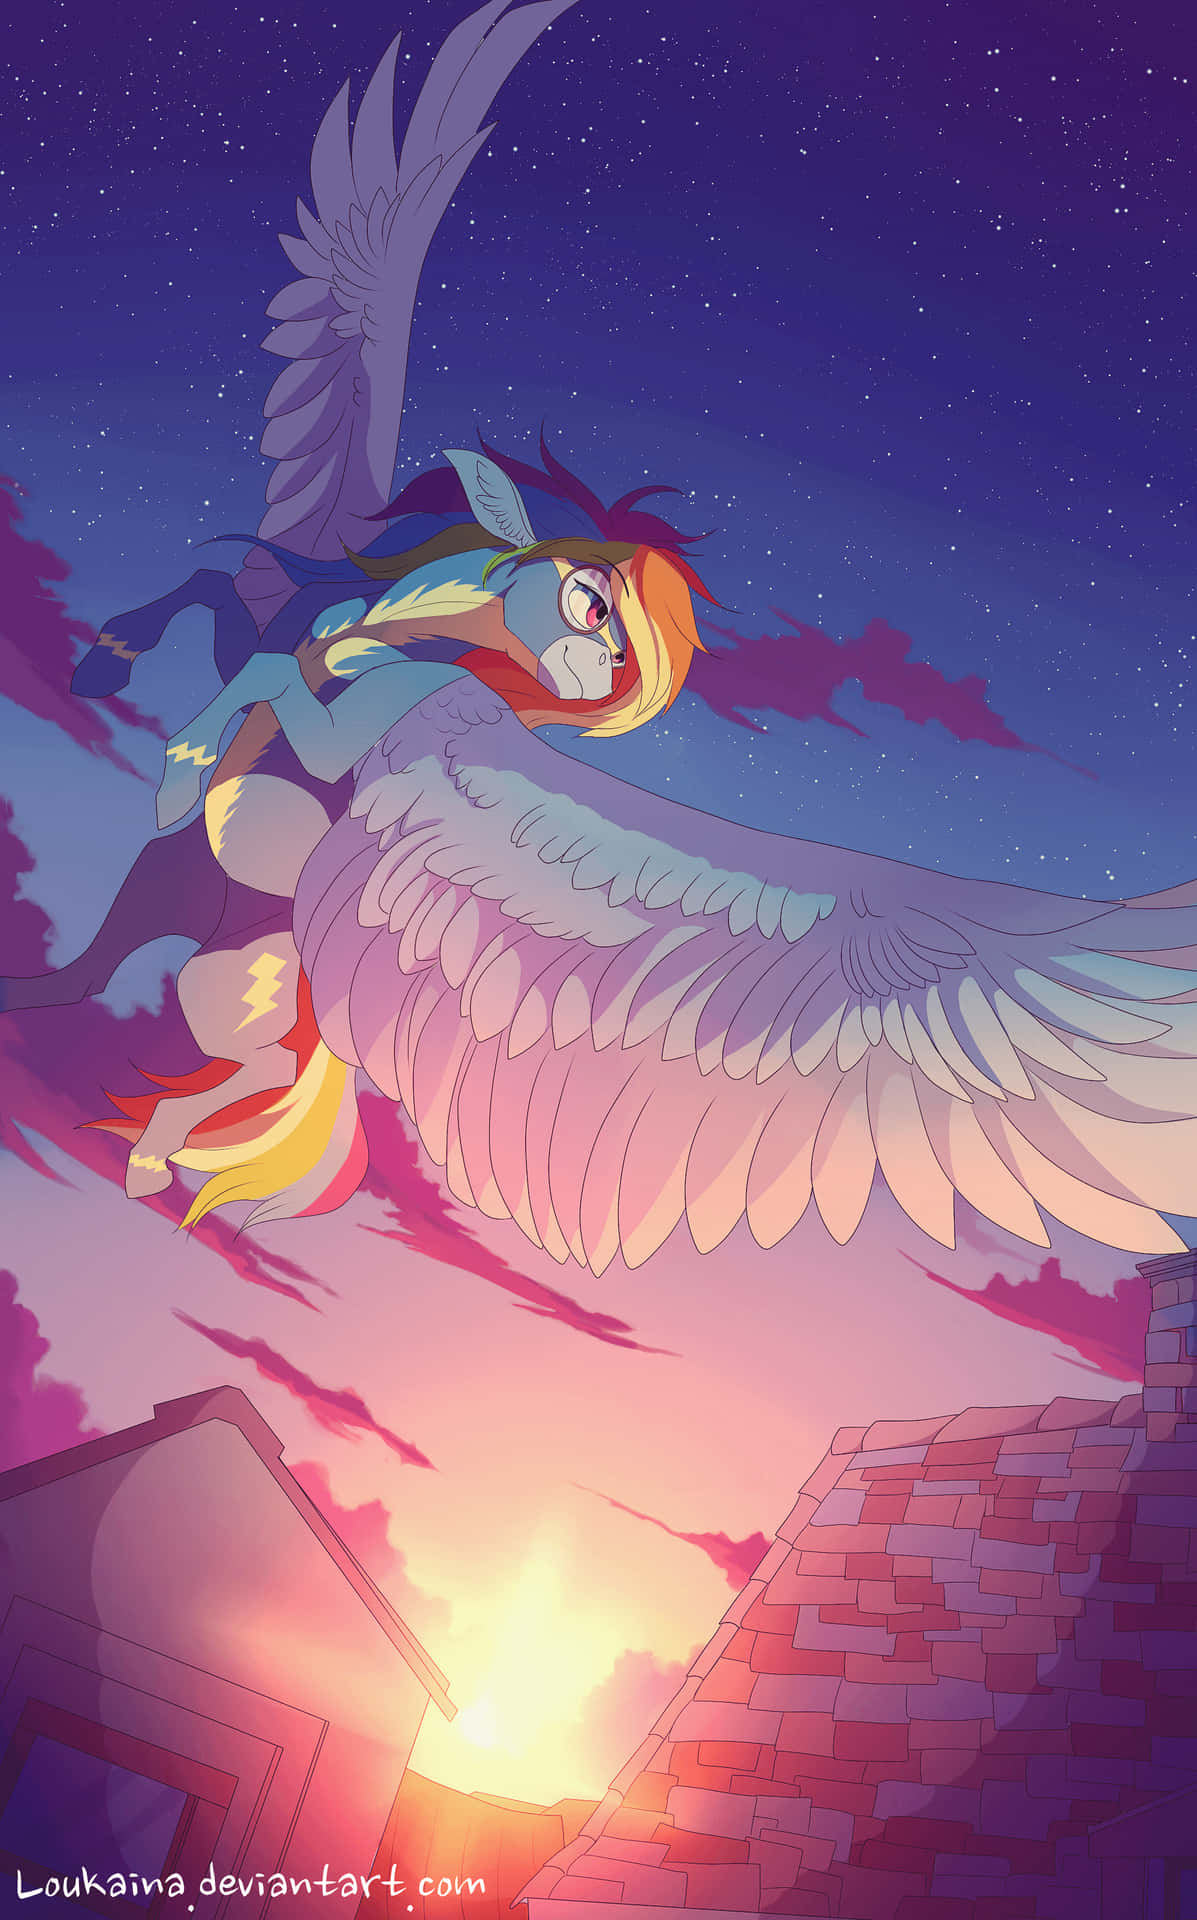 A Pony Flying Over A House At Night Wallpaper